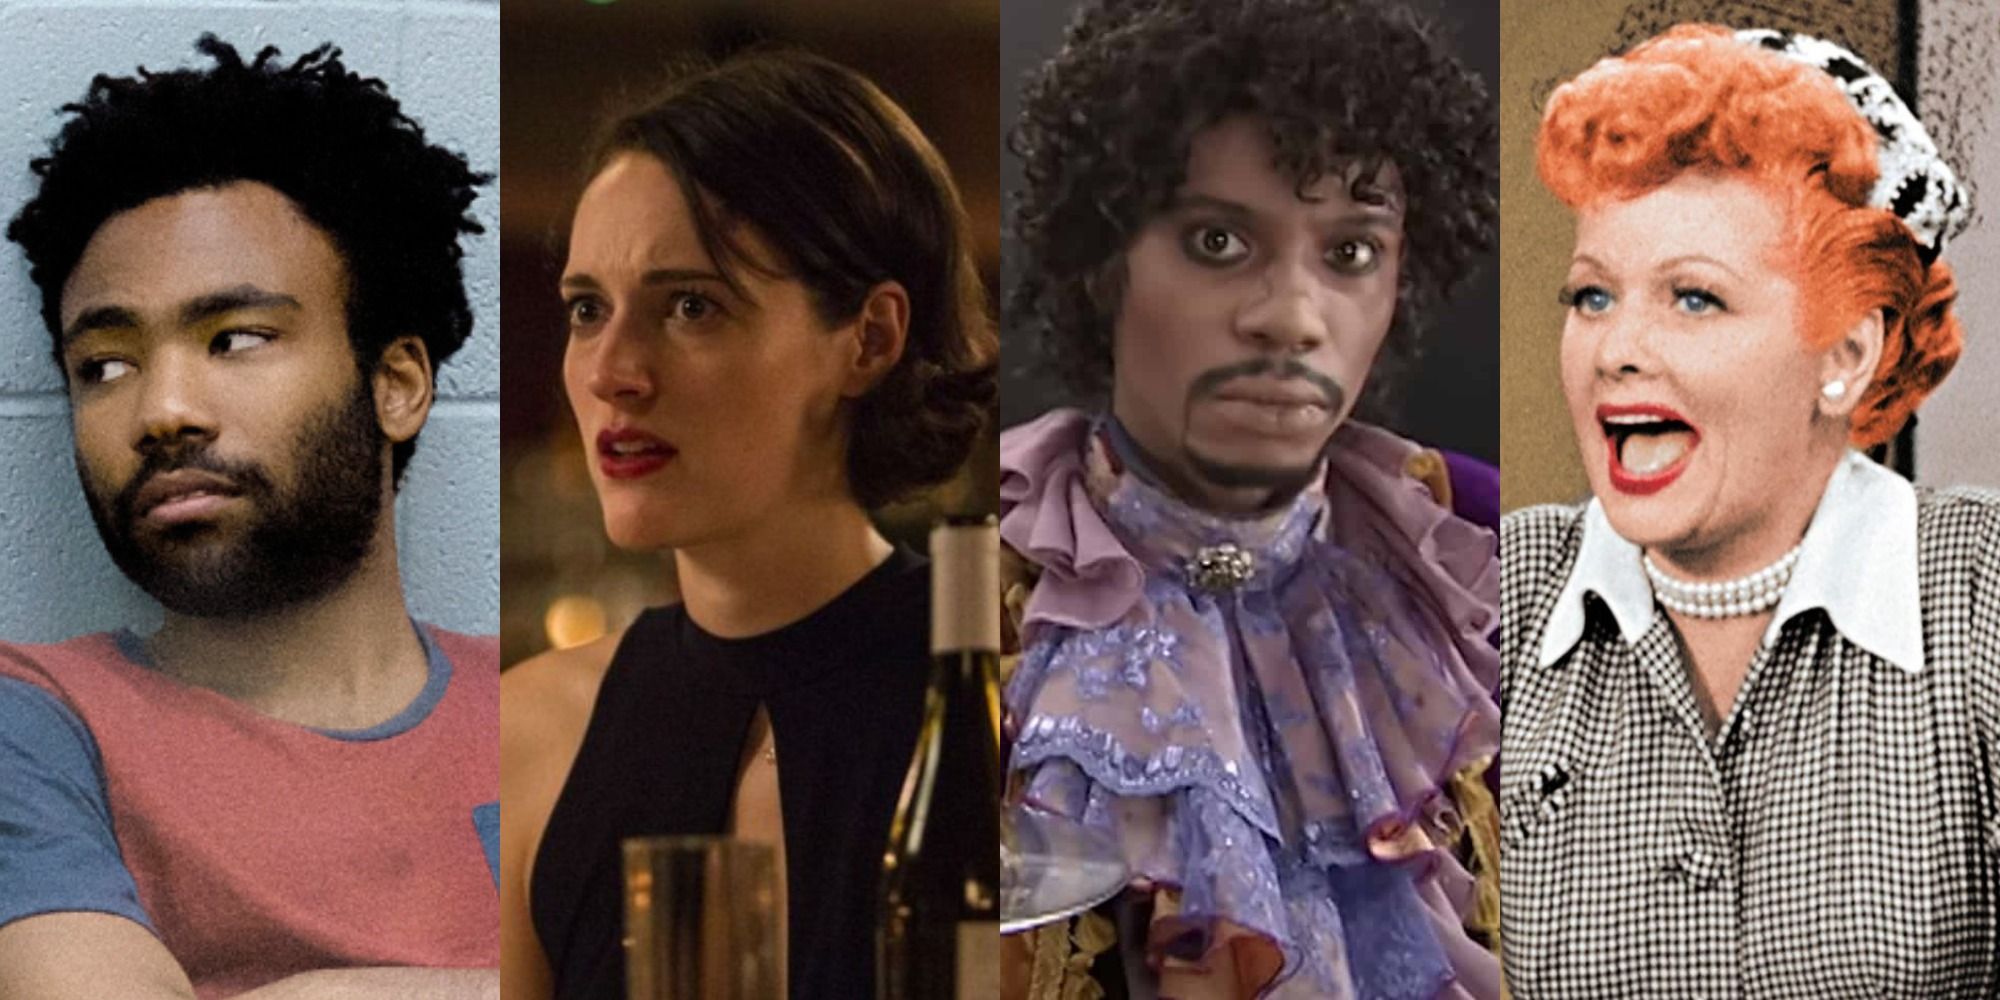 collage of ernie (atlanta) fleabag (fleabag) dave chappelle as prince (chappelles show) and lucy ricardo (i love lucy)